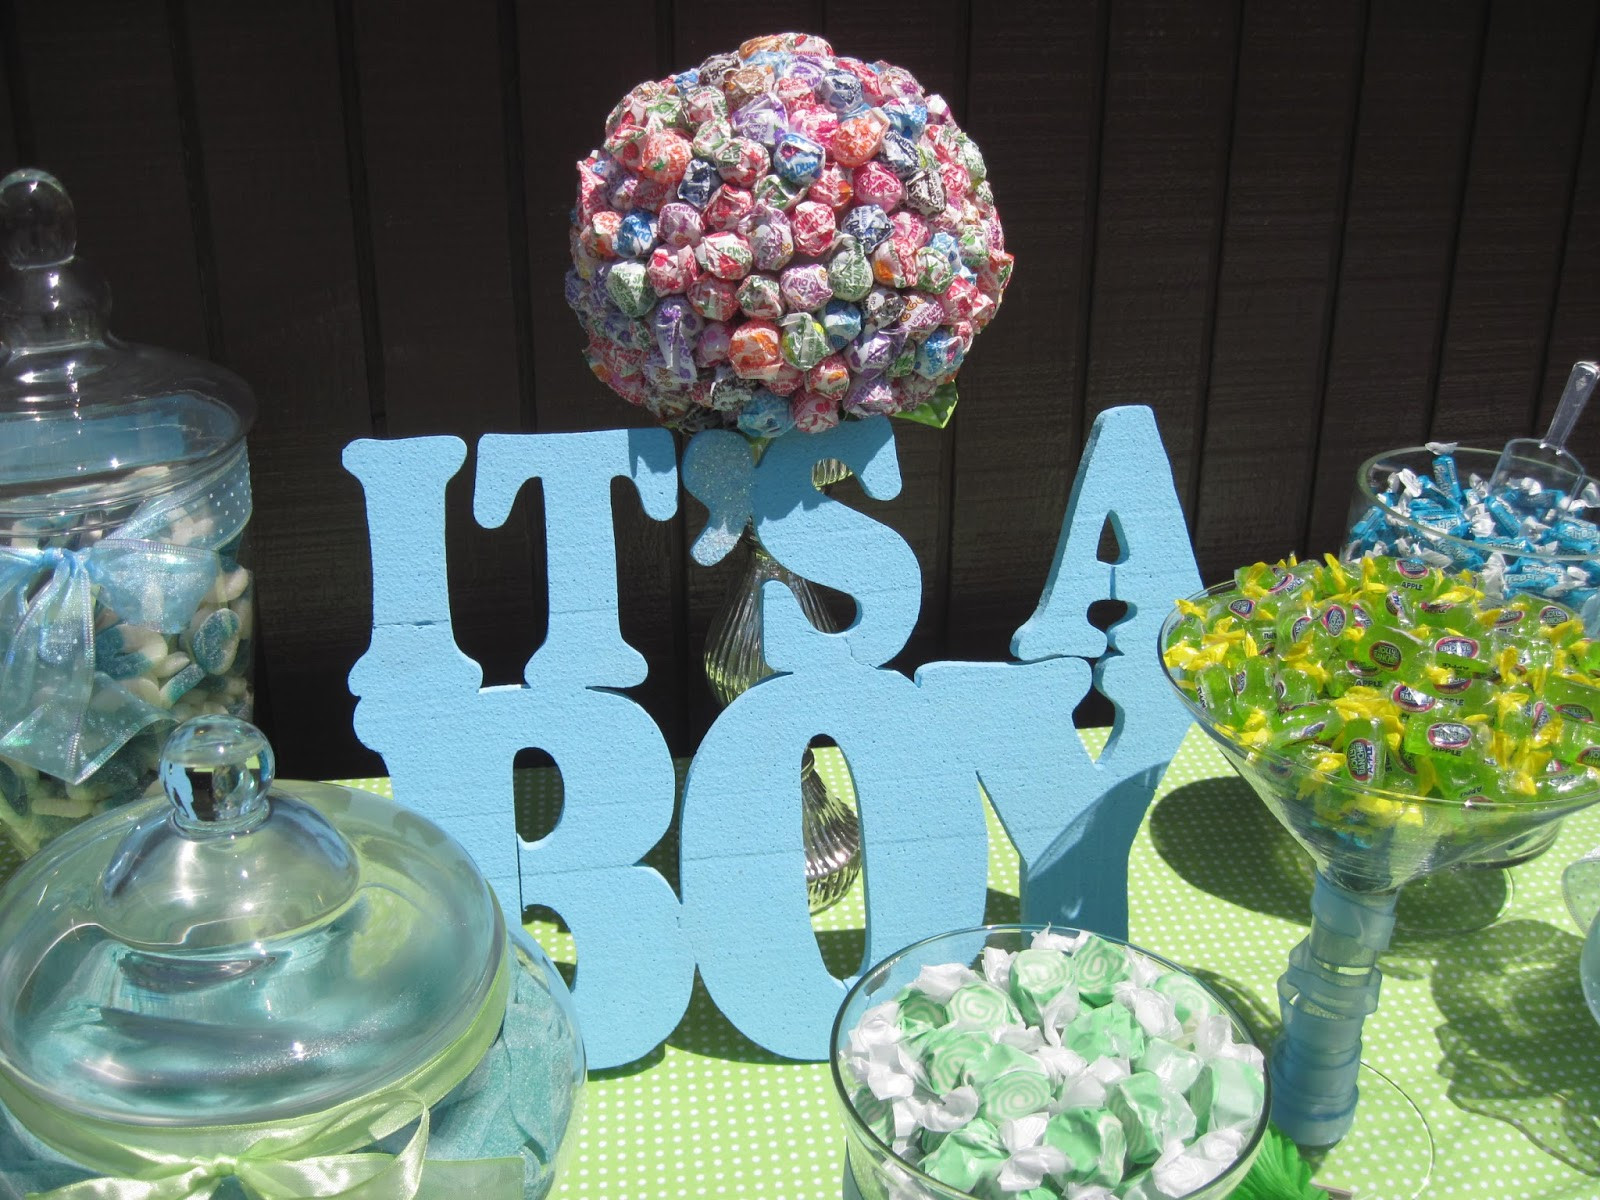 Decoration Ideas For Baby Shower
 eve4art DIY Baby Shower Decorations